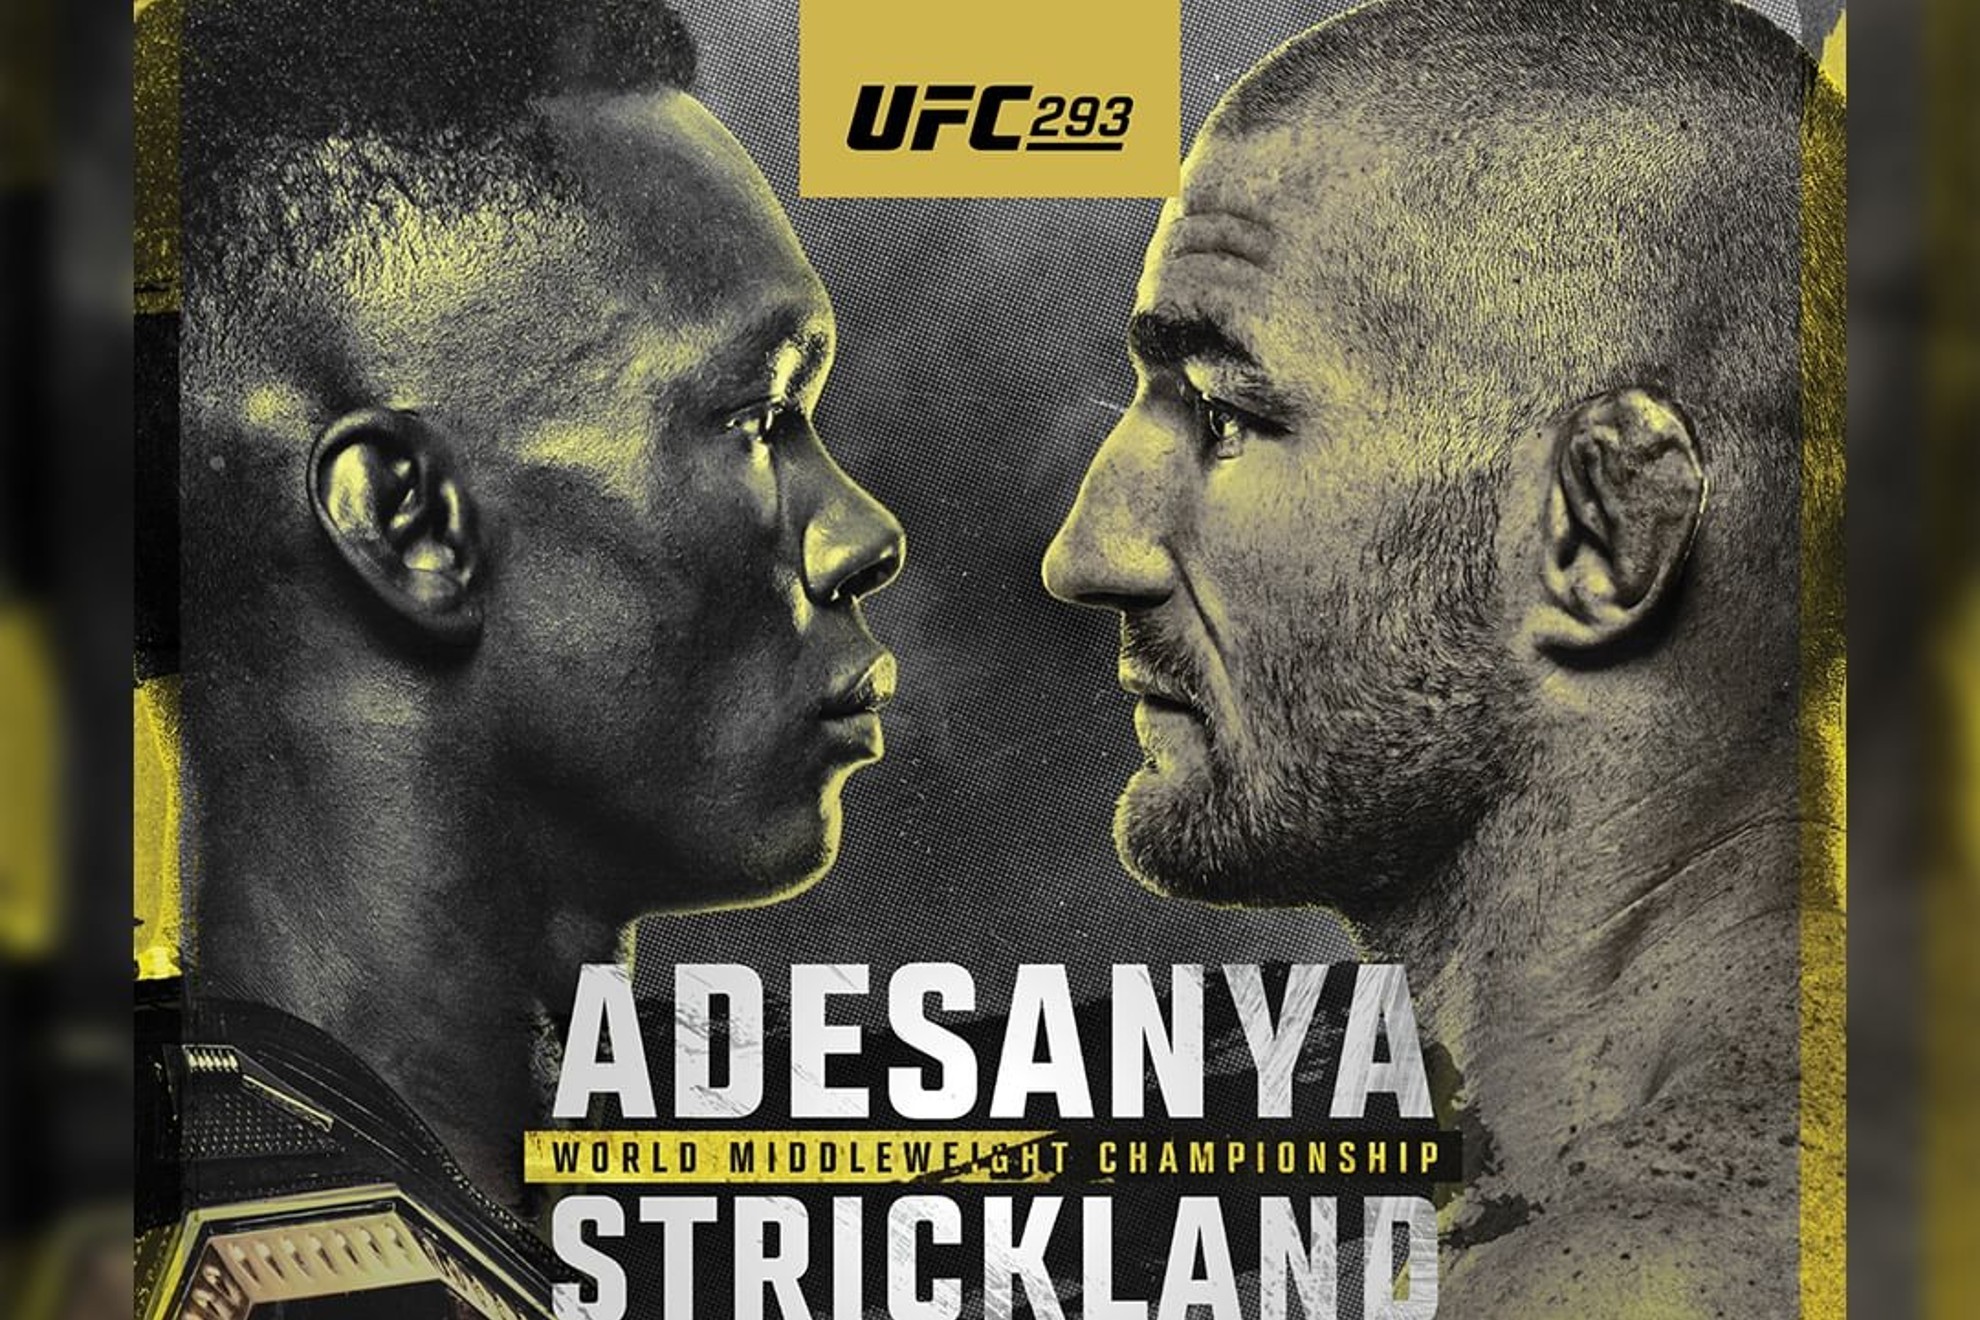 UFC 293: When is the Adesanya vs Strickland UFC Fight Night?